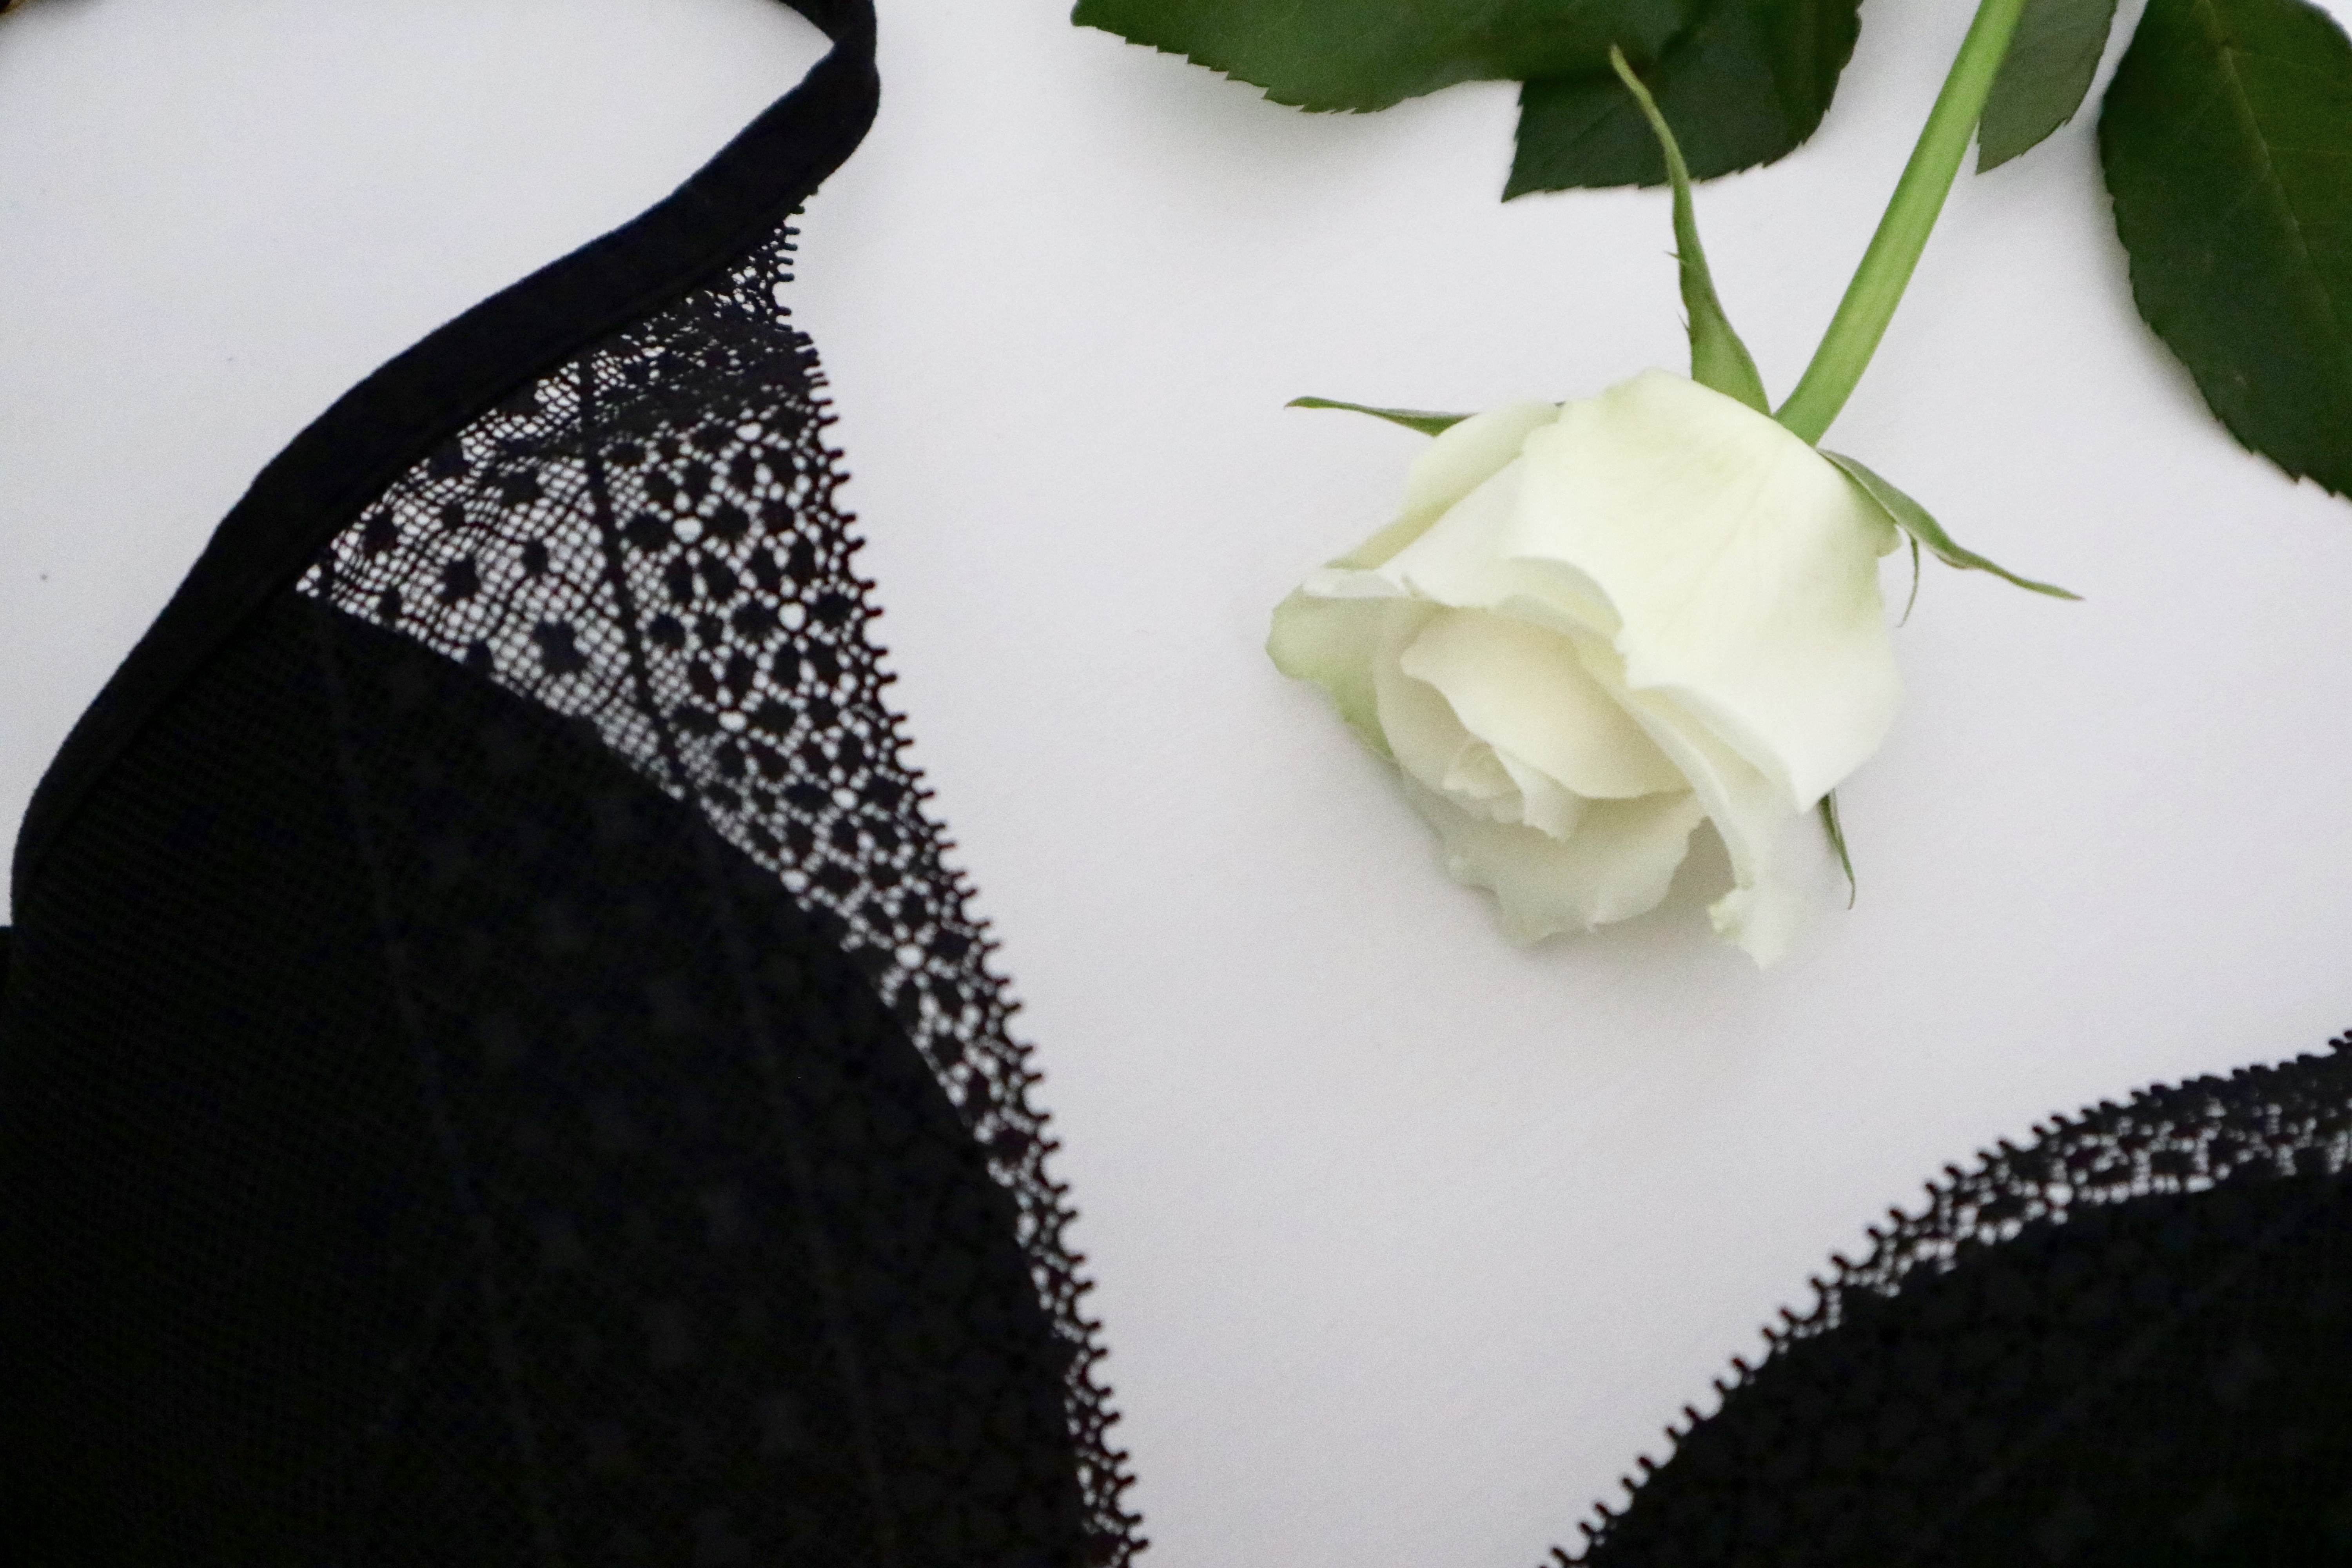 Image of a rose and a bra with lace detailing